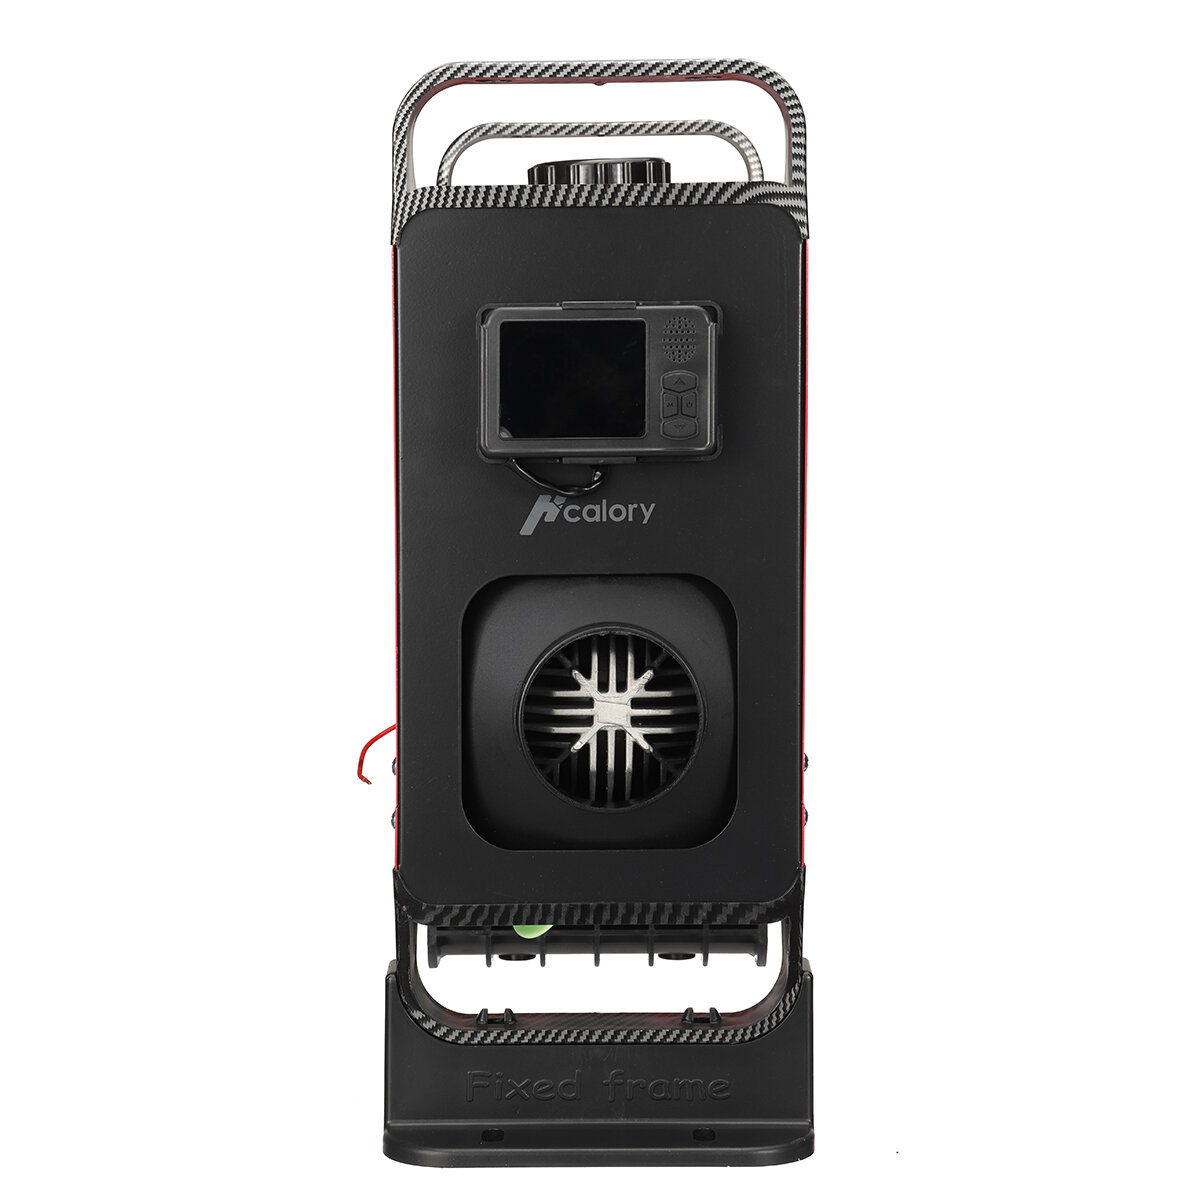 Hcalory HC-A02 12V 24V 5-8KW Car Parking Diesel Air Heater 5L Tank LCD Screen bluetooth APP Remote Control Voice Broadcast With Silencer